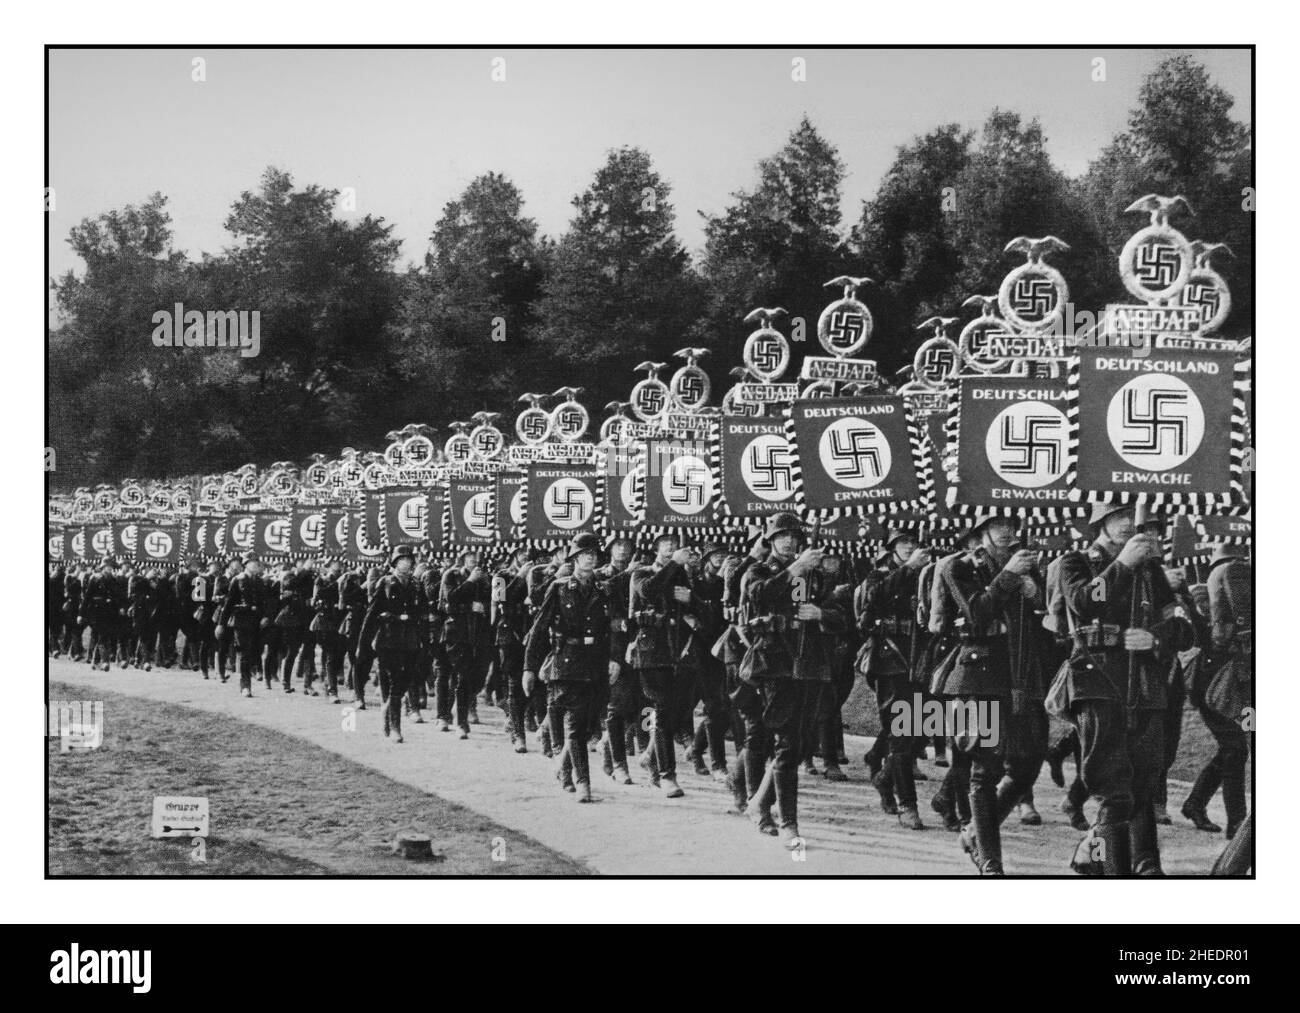 Nazi SS Troops holding banners with NSDAP Deutschland Erwache 'Germany Awakes' 'Victory Congress' (V Imperial Party Congress) Standards of the Schutzstaffel at the Reichsparteitag, 1936 -in Nuremberg Parade  Nuremberg Nazi Germany Stock Photo